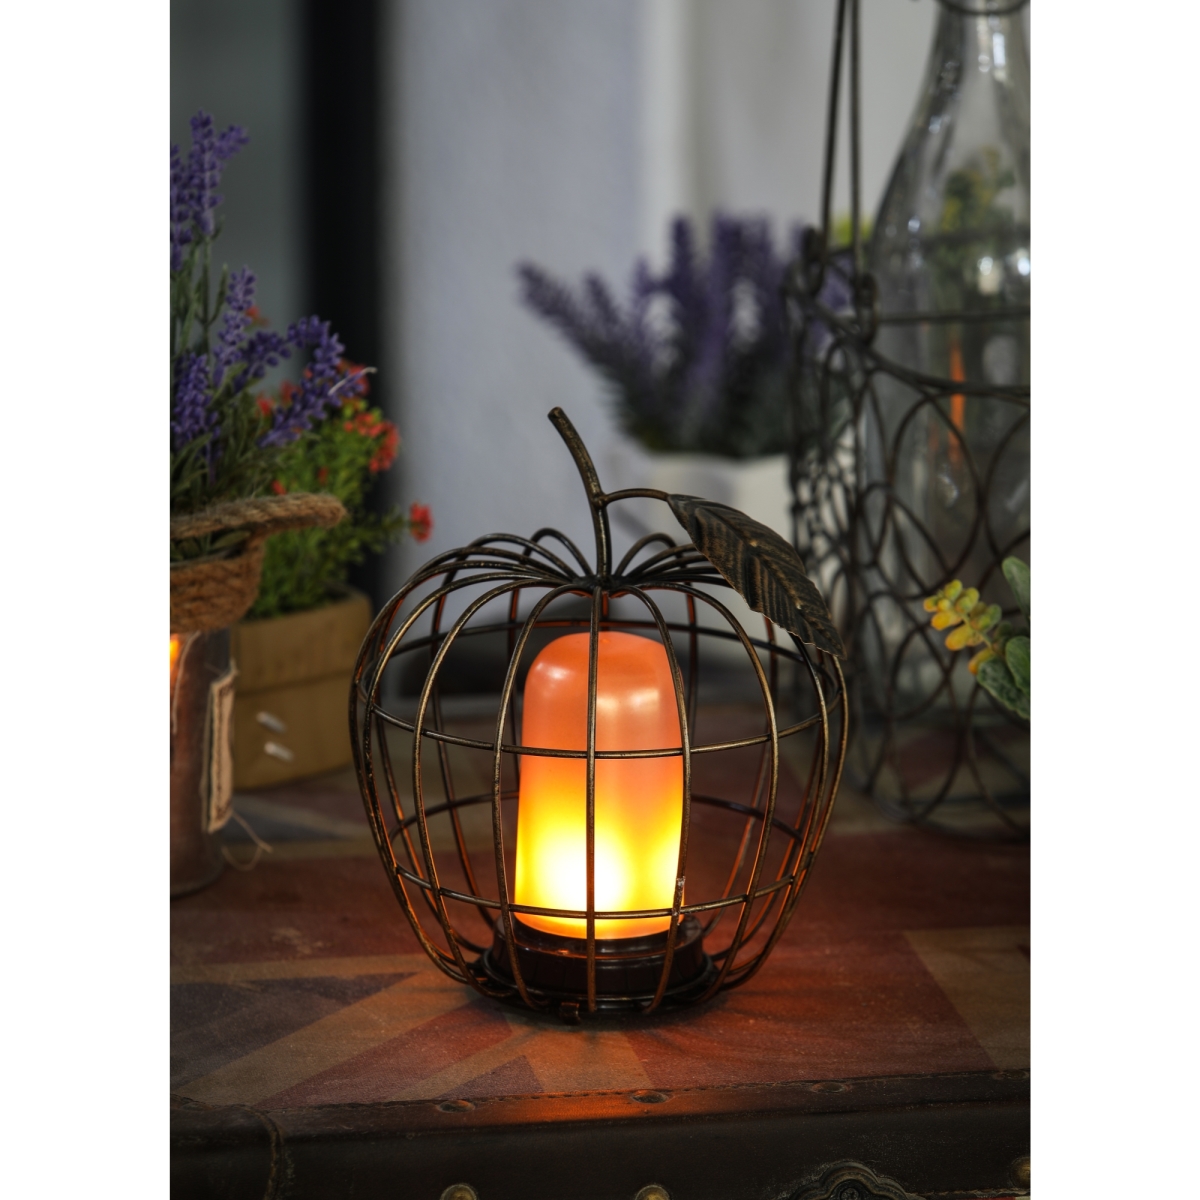 Luxen Home Whdl407 7.5 In. Iron Apple Cage Led Lantern